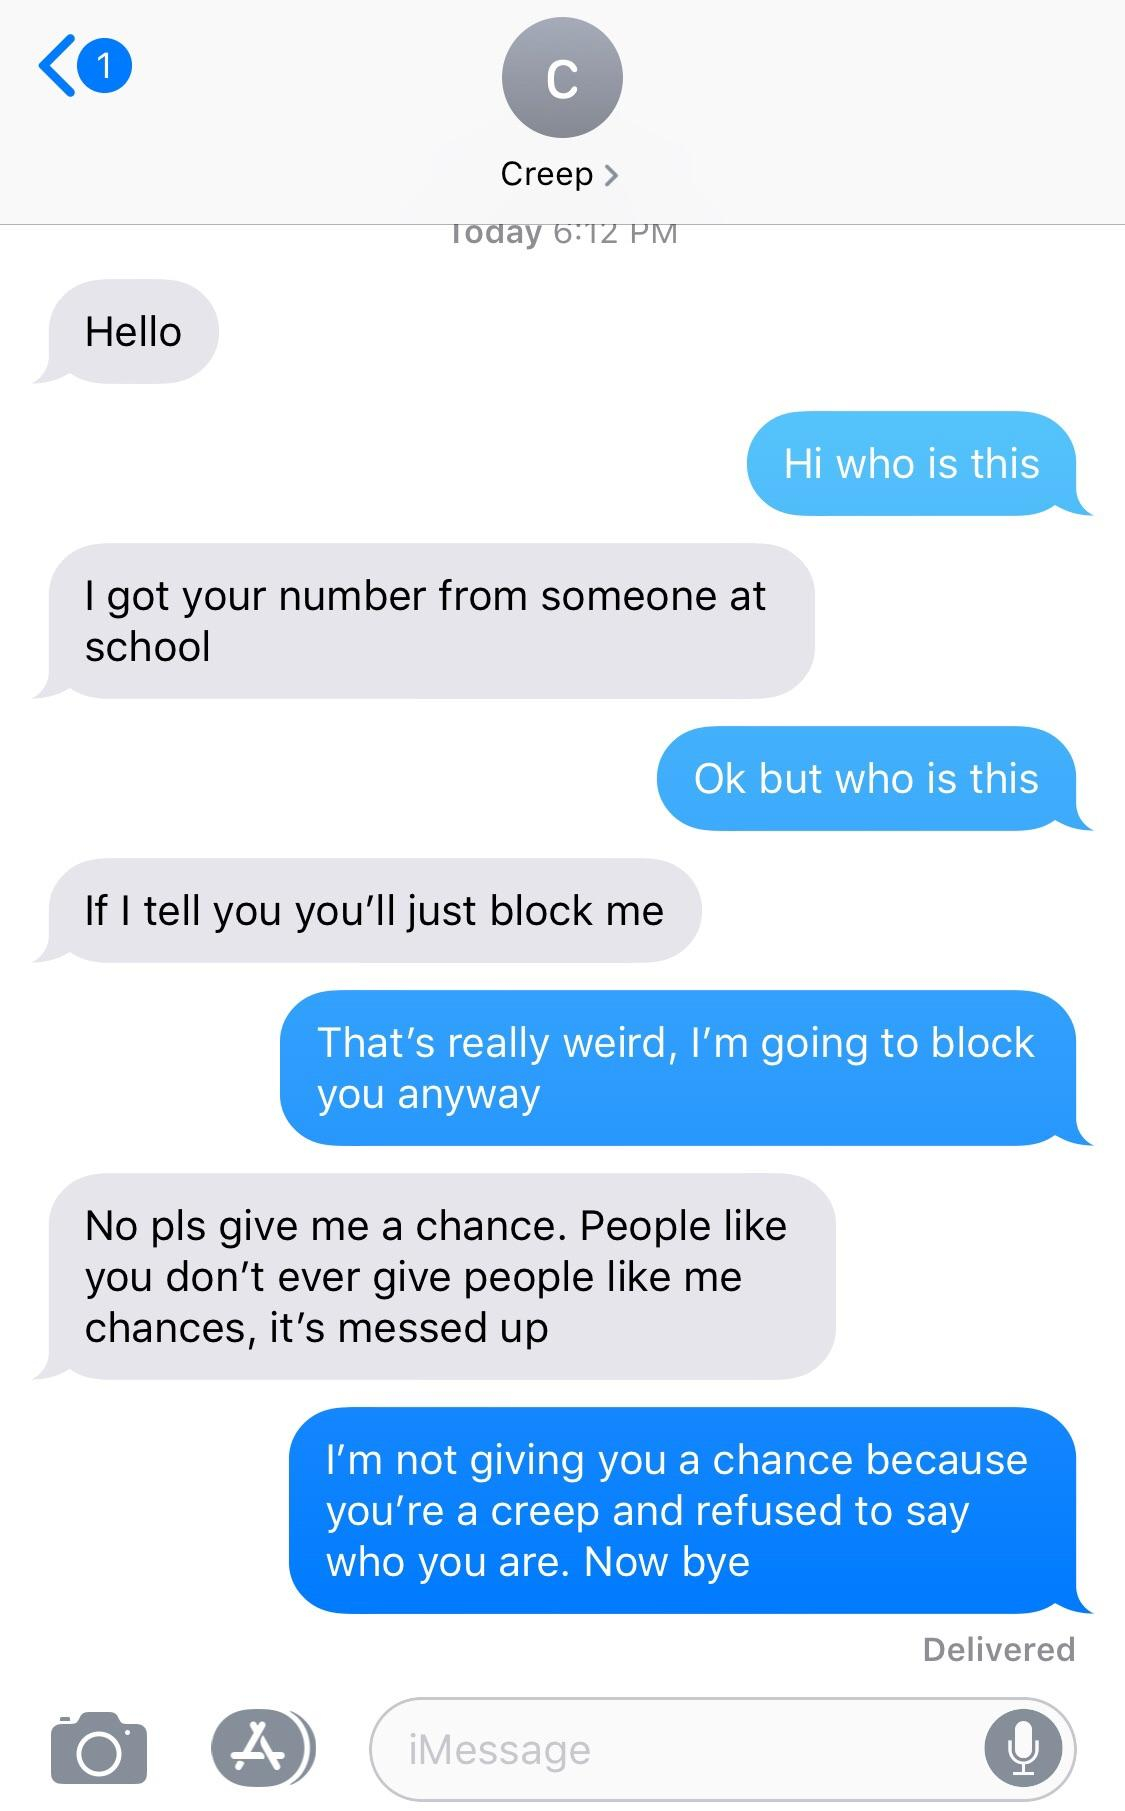 screenshot - Creep Today Tm Hello Hi who is this I got your number from someone at school Ok but who is this if I tell you you'll just block me That's really weird, I'm going to block you anyway No pls give me a chance. People you don't ever give people m